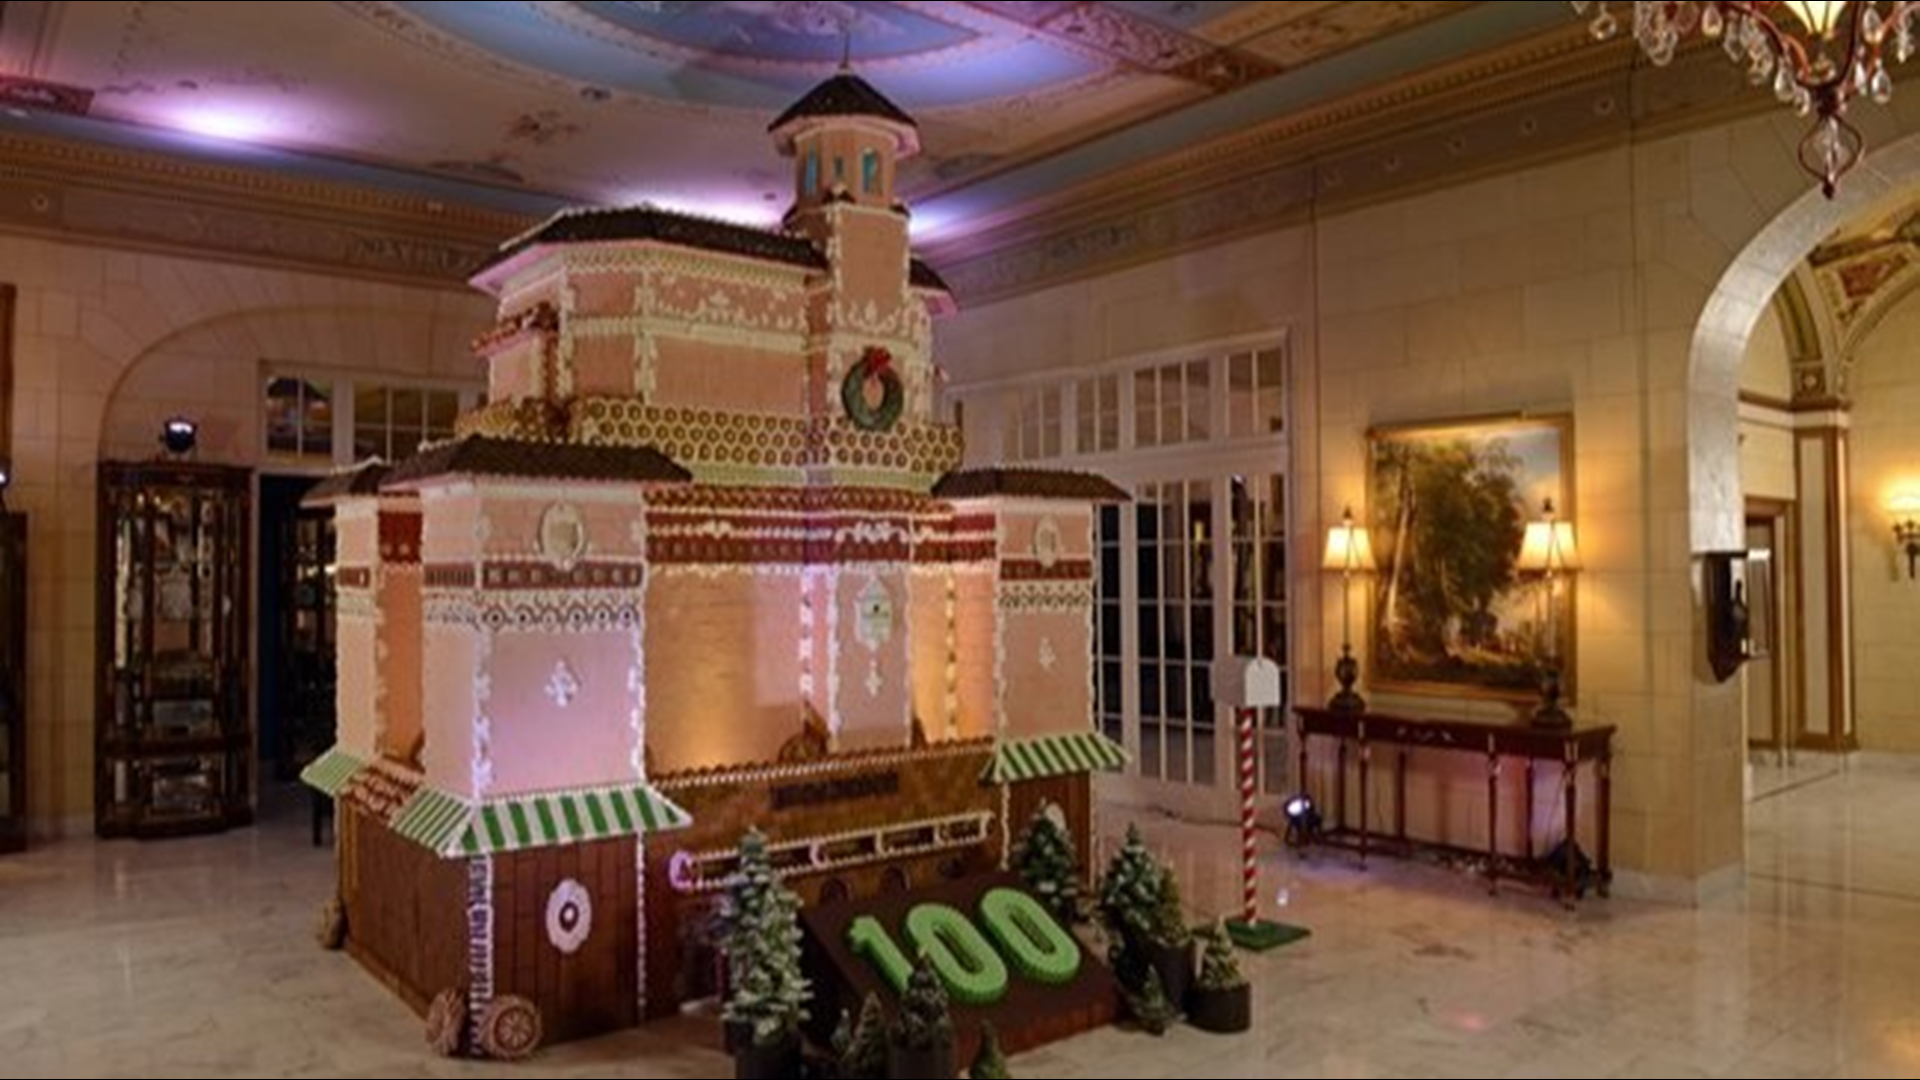 A massive 13 ½-foot-tall, 120-square-foot gingerbread replica of the original 1918 Broadmoor resort is on display at the Colorado Springs hotel.